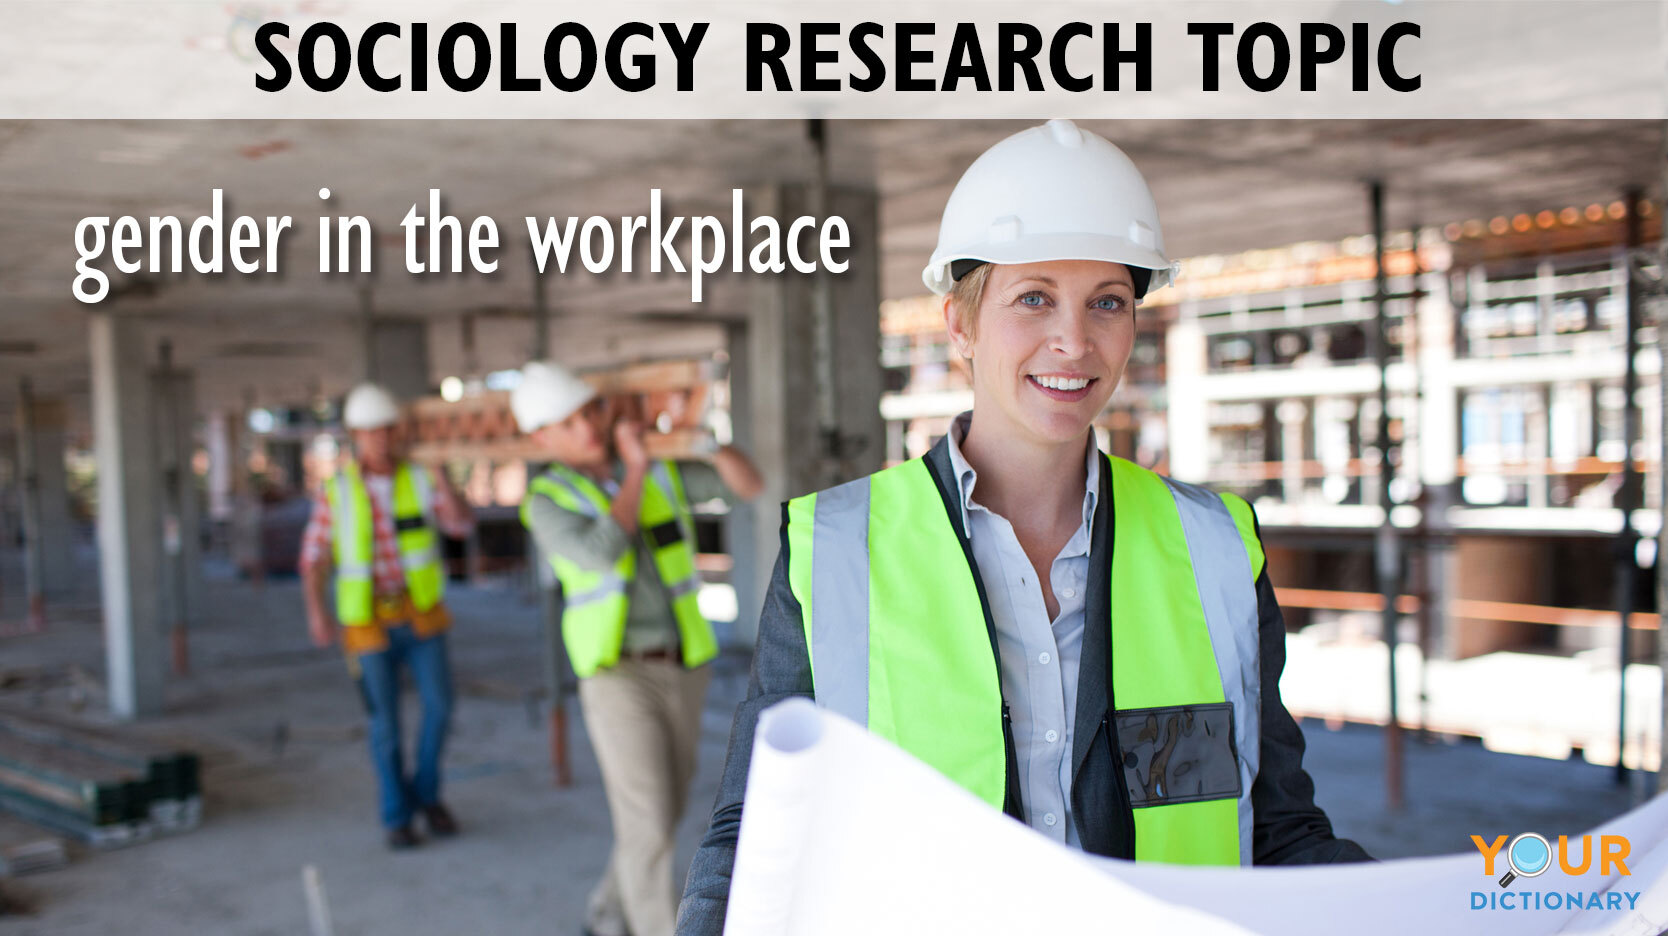 Sociology research topic gender in the workplace